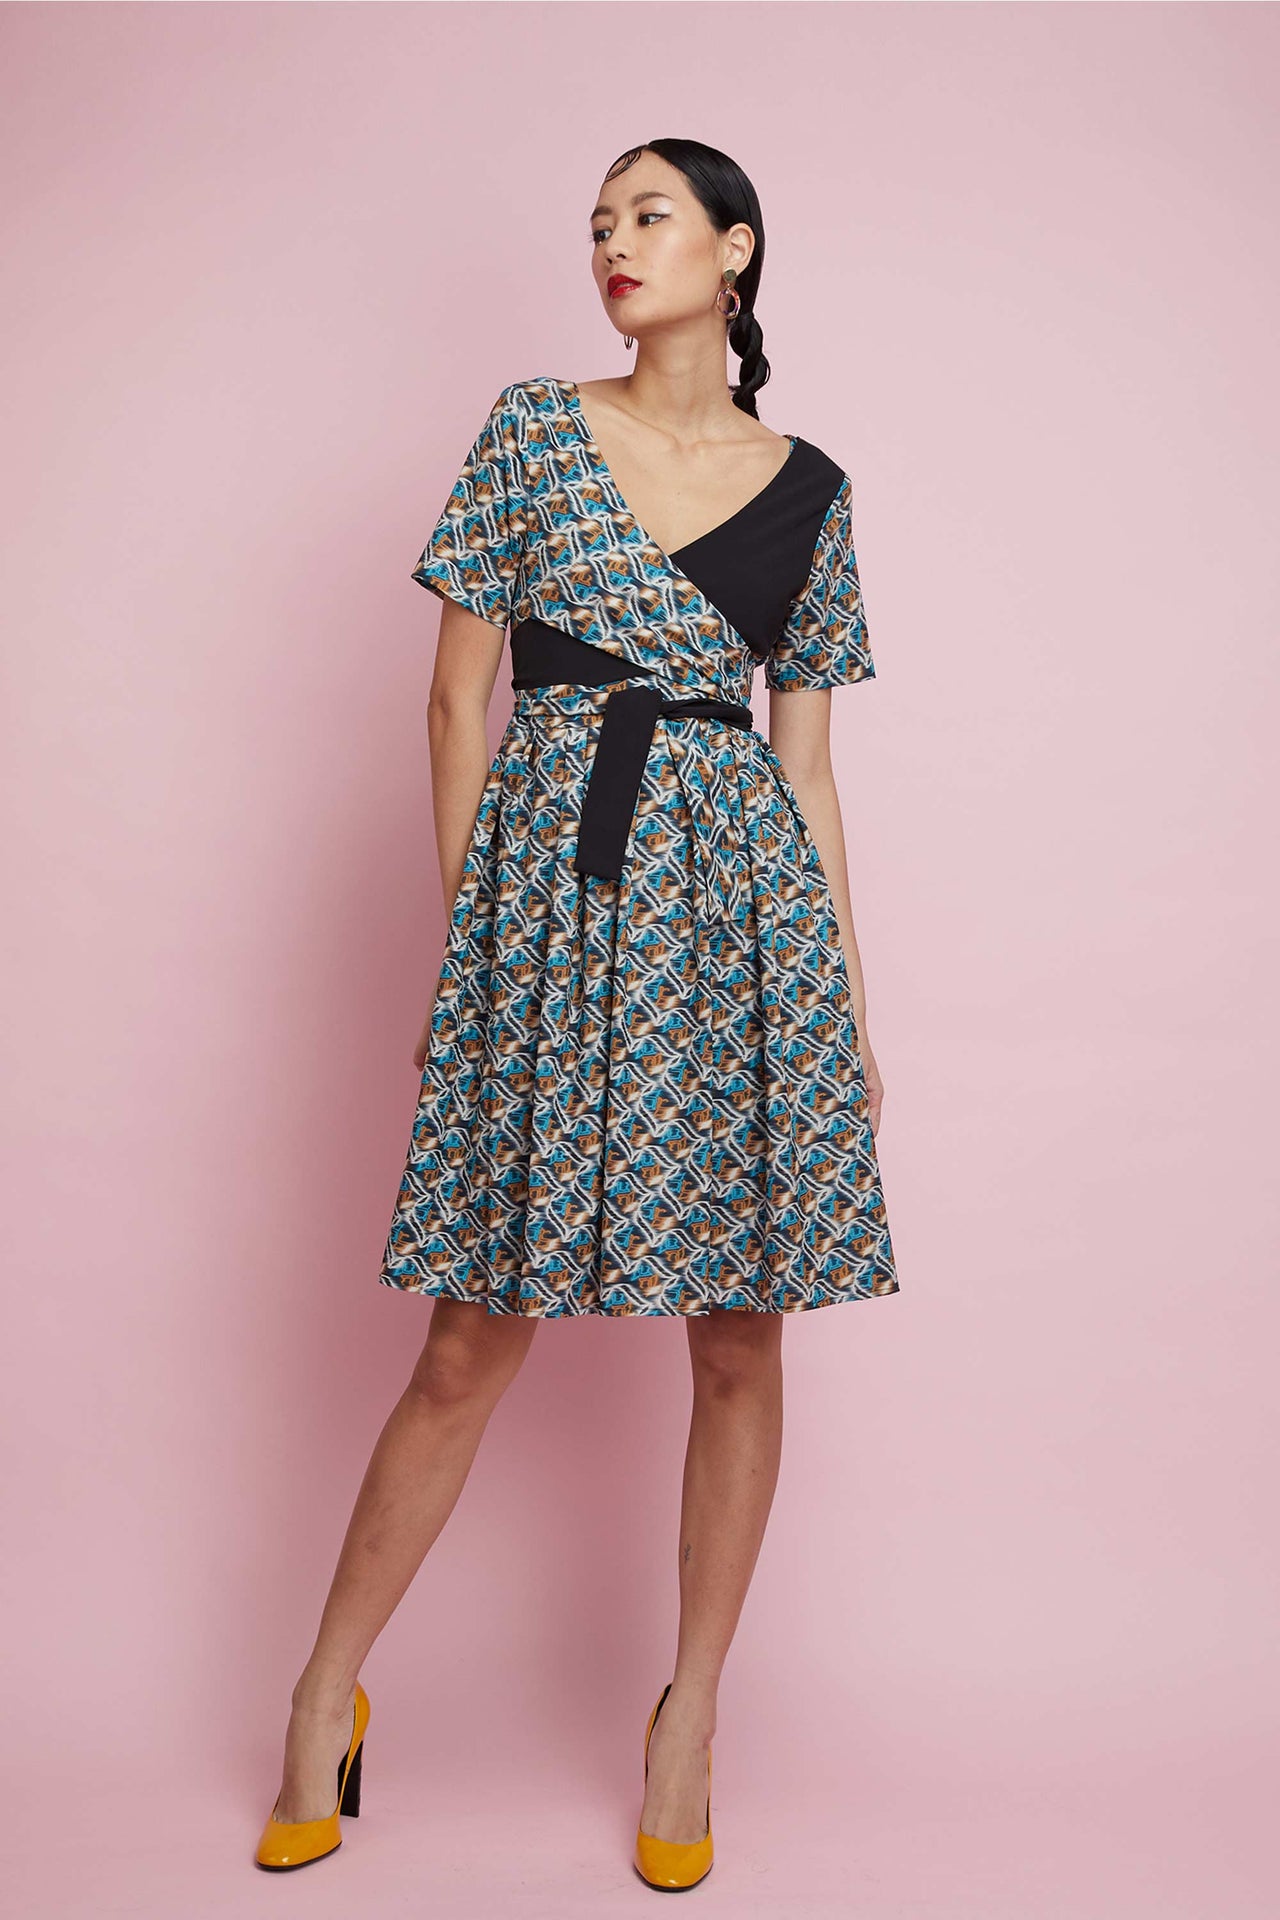 Back-to-Front Dual Box Pleat "Mi-Knee" Dress (Helicon Kecil)